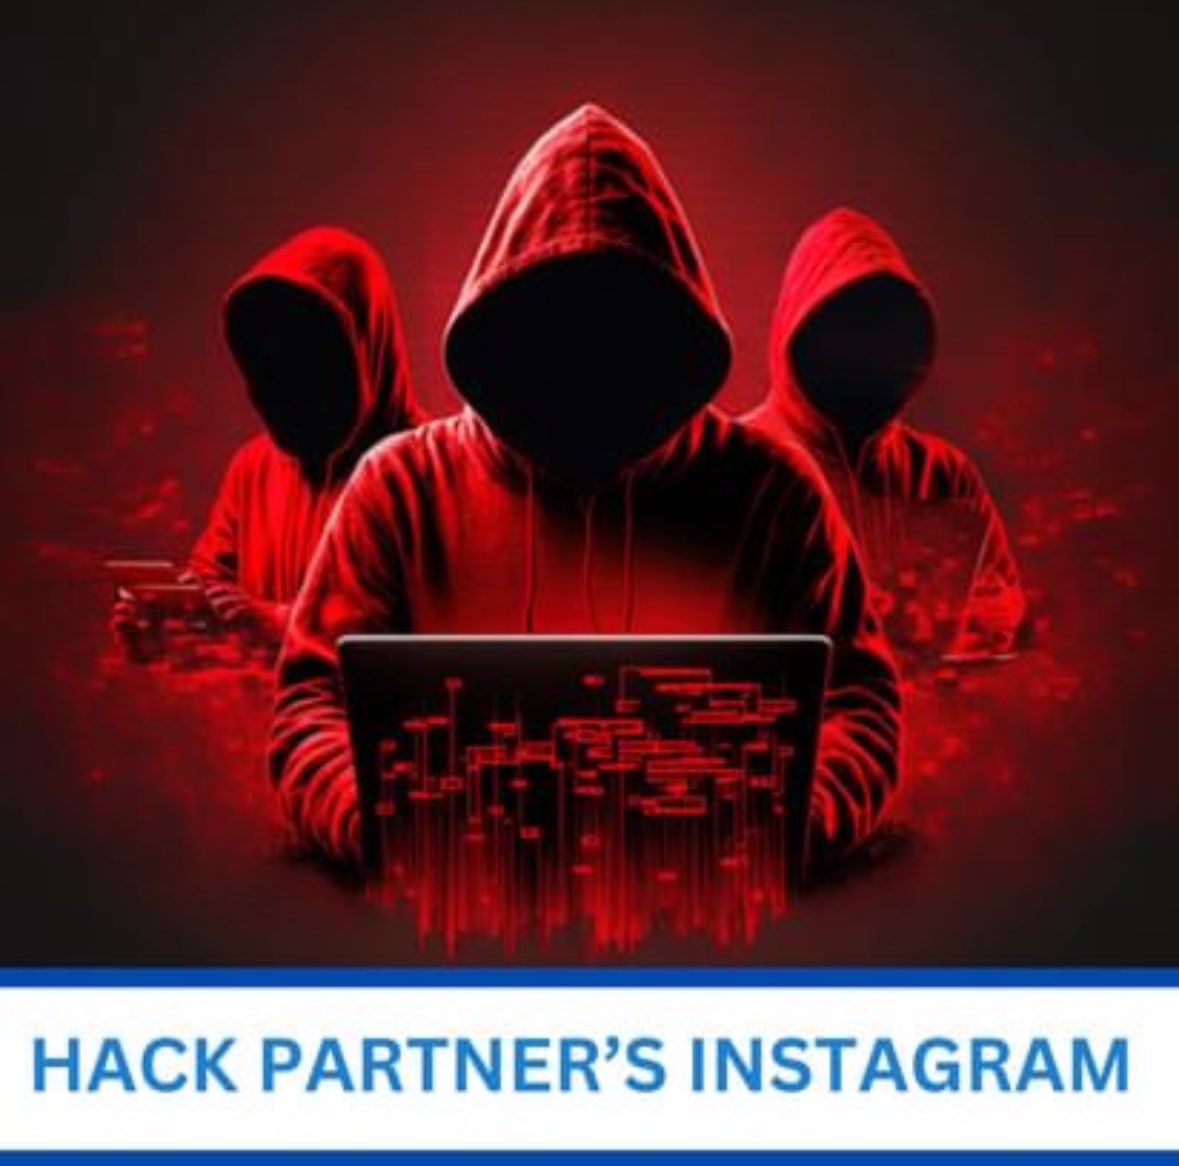 🏴‍☠️we do ethical hacking for good purpose and social media accounts recovery You can learn hacking with us DM us if you have questions related to hacking Tags:-#hackers #hacking #hacker #cybersecurity #ethicalhacking #hack #kalilinux #canada #ethicalhacker #programming #usa